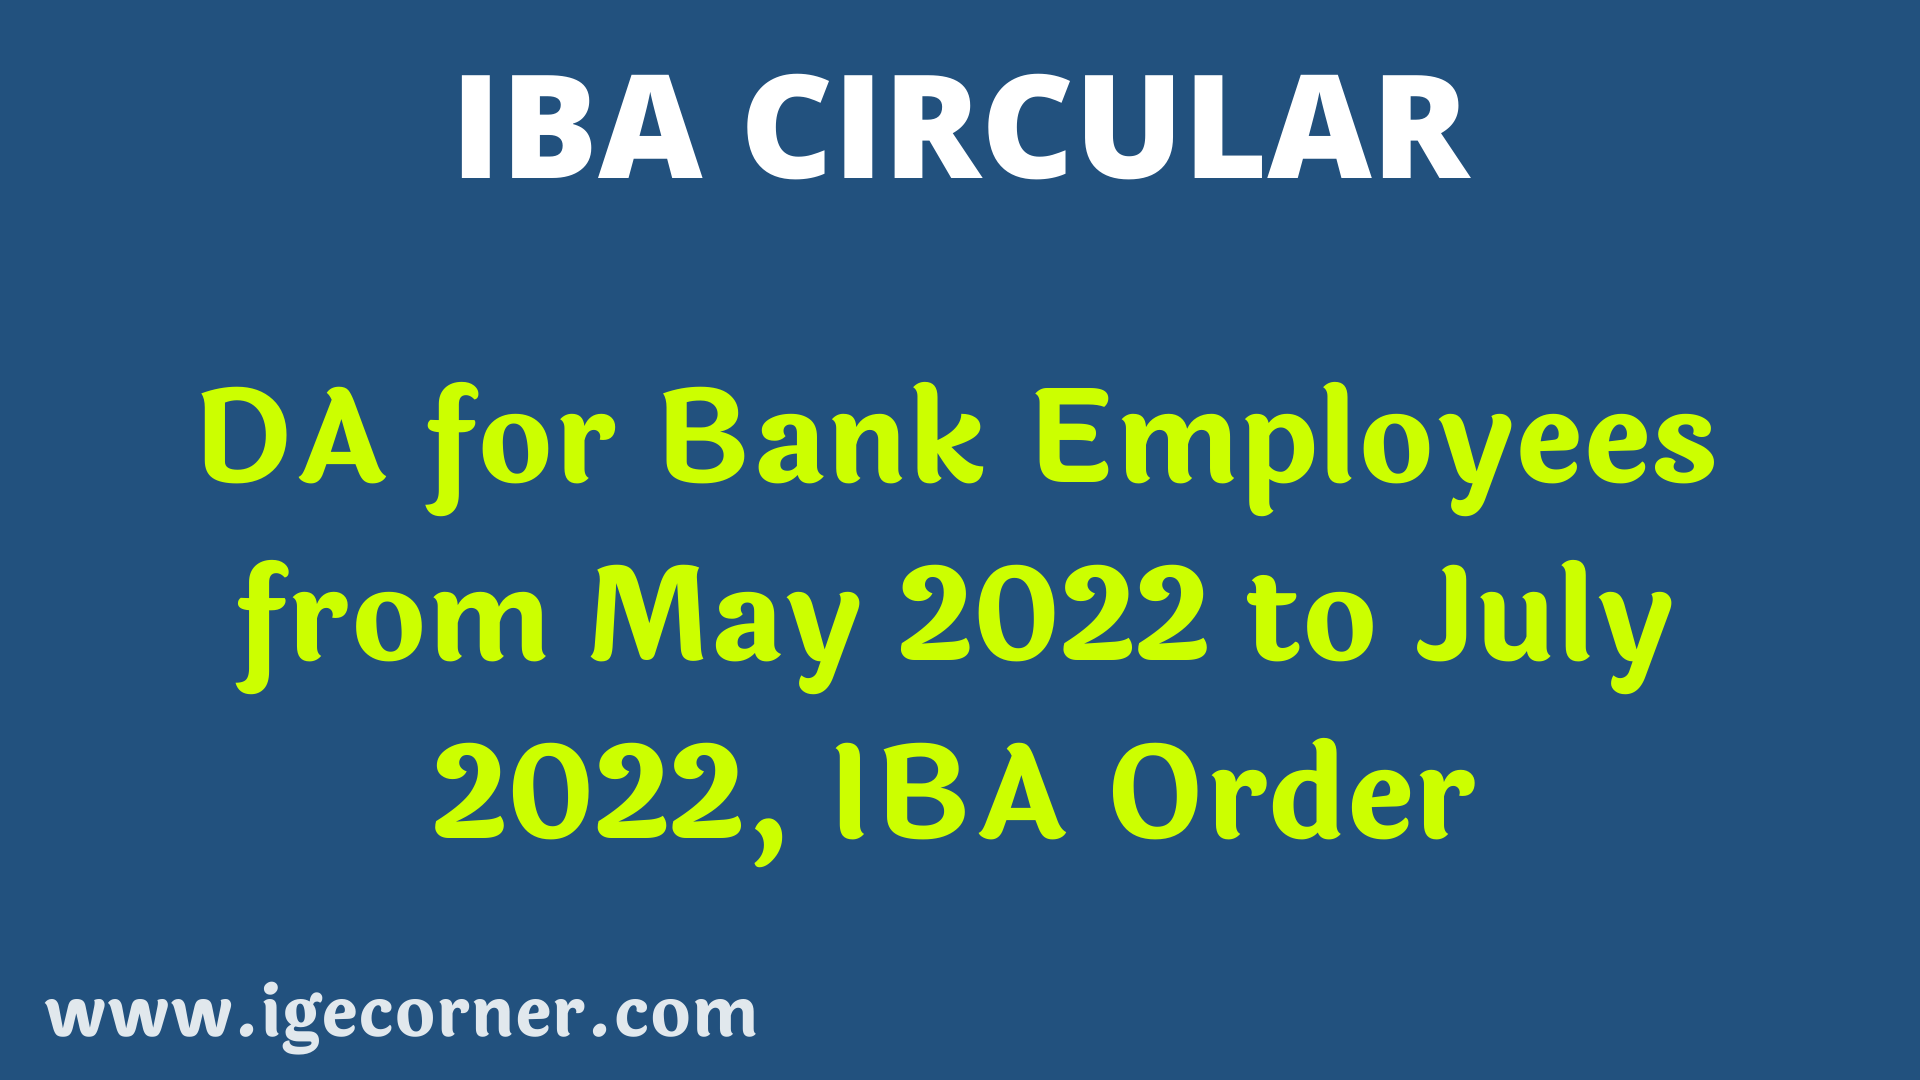 DA for Bank Employees from May 2022 to July 2022, IBA Order Central